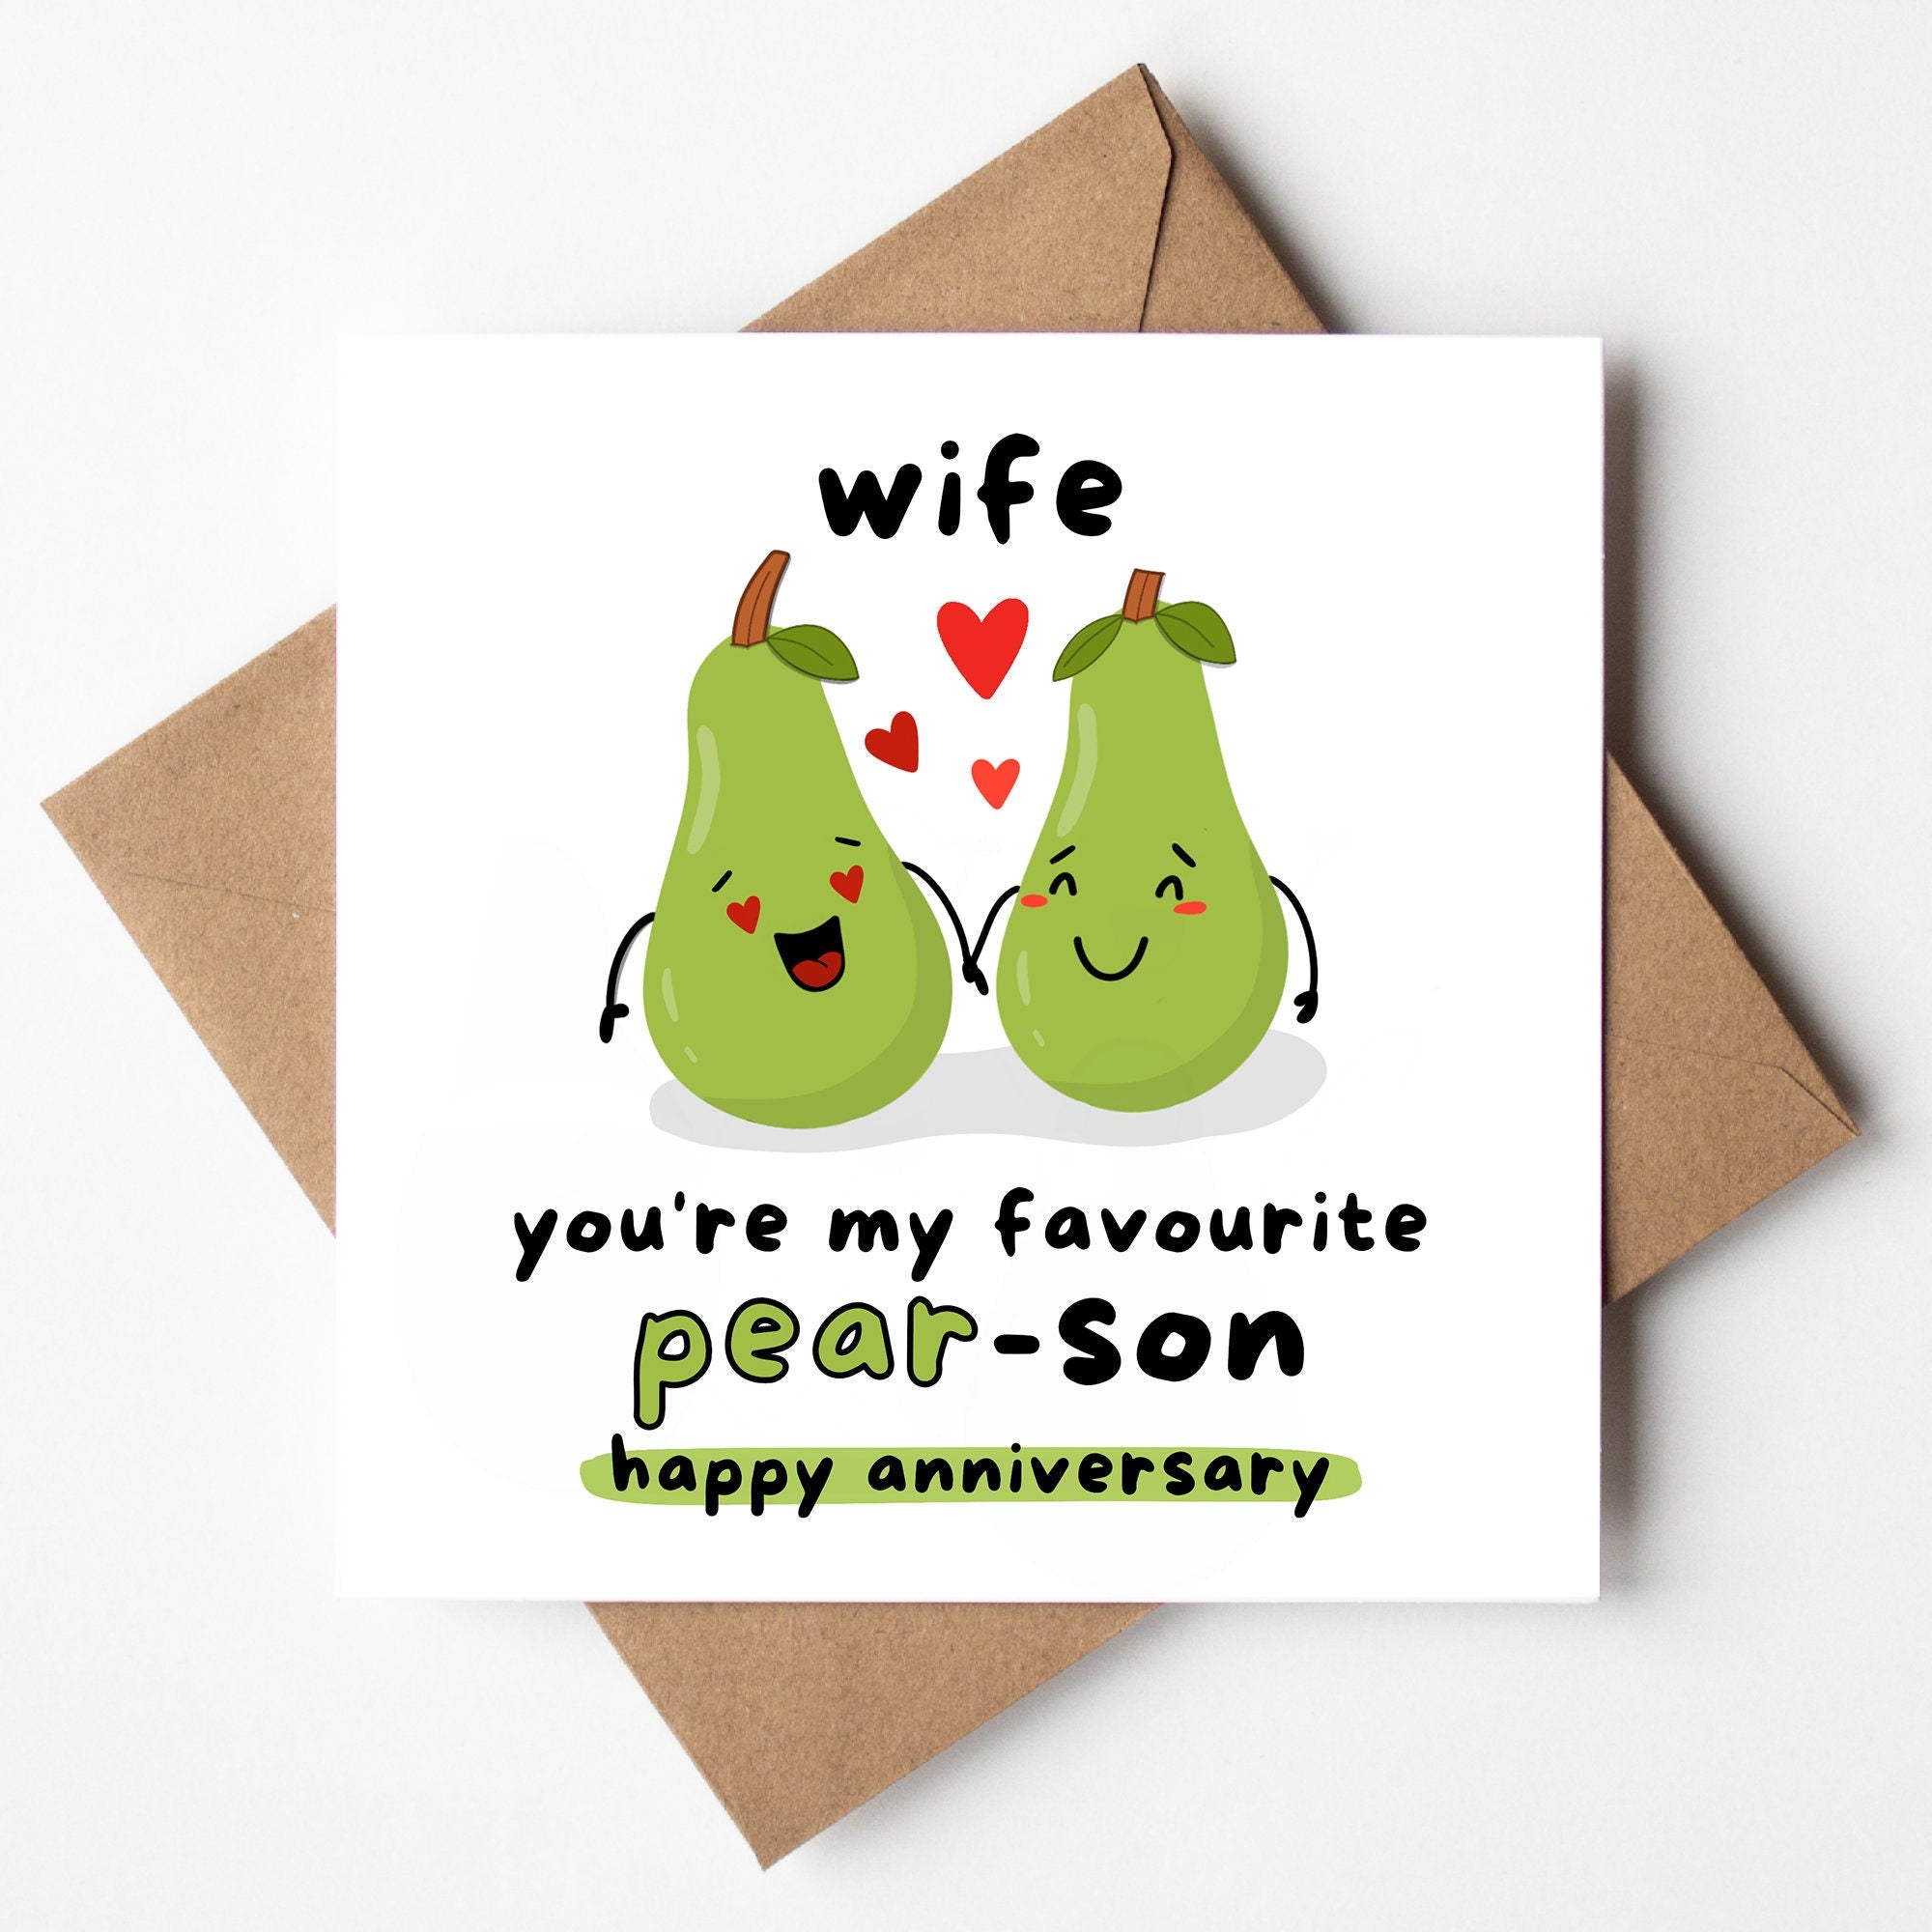 Wife You're My Favourite Pear-son, Best Wife Ever, From Husband, Anniversary Card, For Her, Wife To be, Girlfriend, Cute, Greeting Card